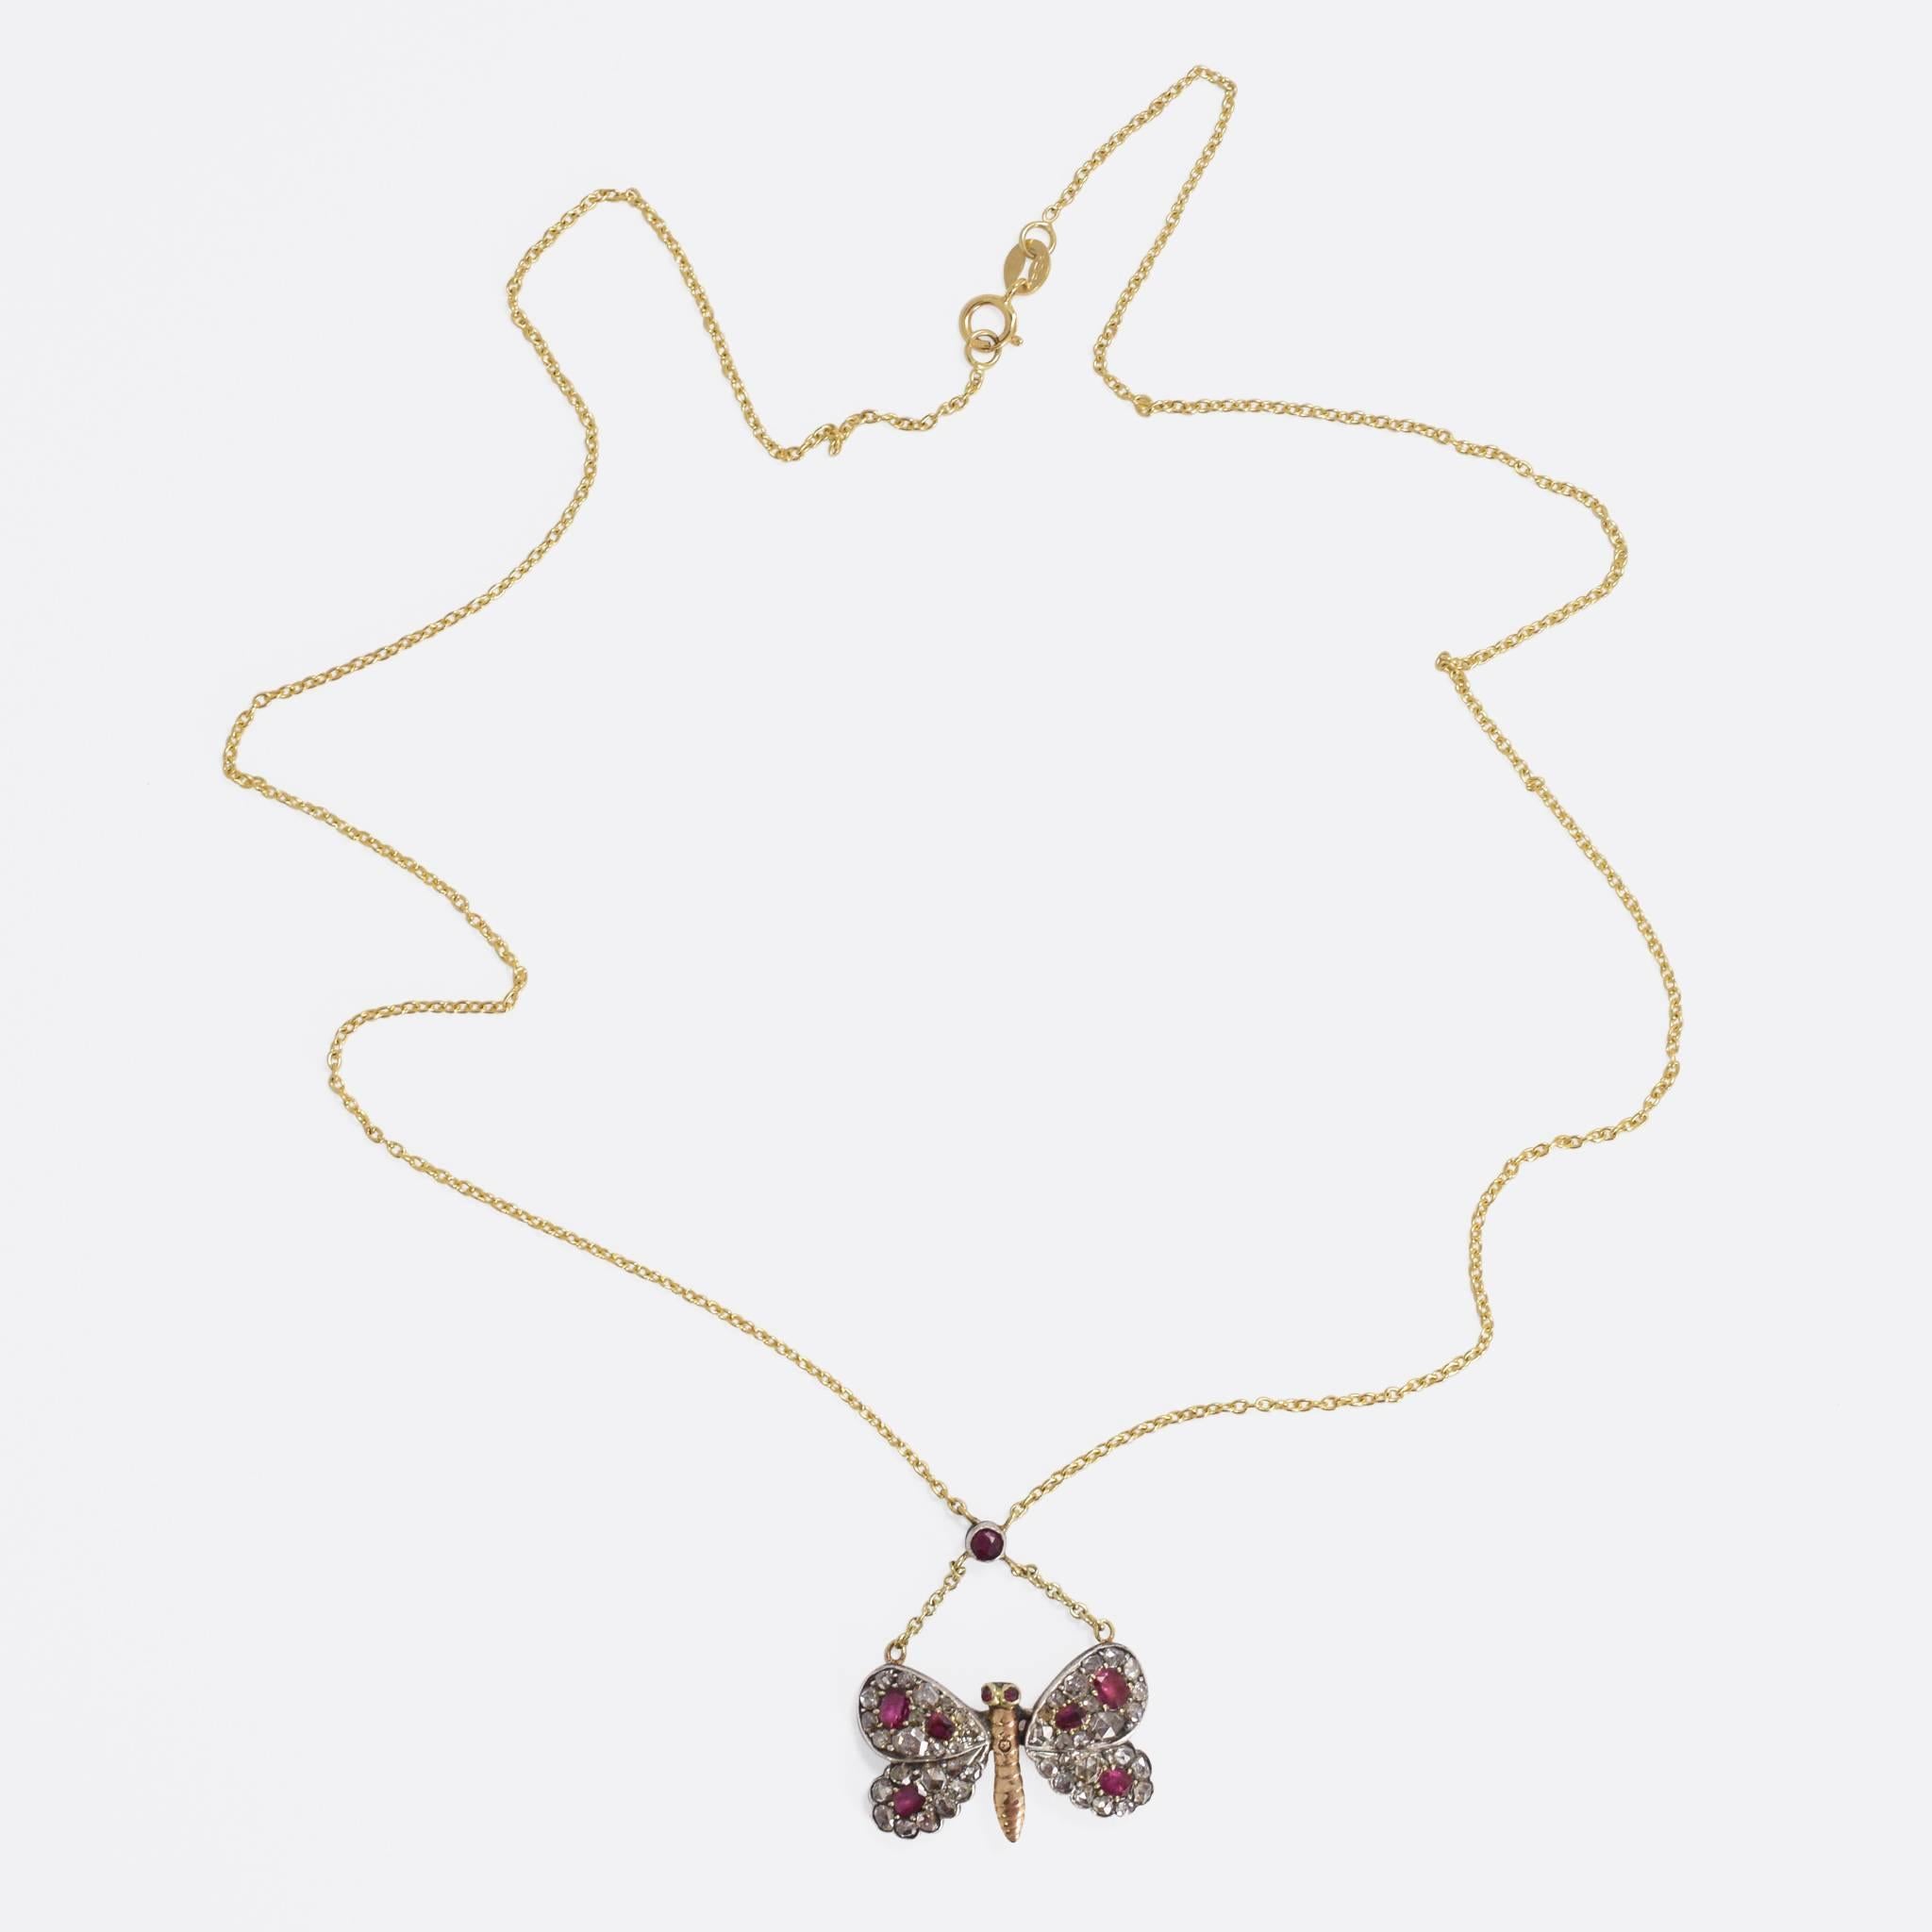 This adorable antique necklace is fashioned as a diamond-studded butterfly, with vibrant ruby accents. The butterfly itself is likely of Russian origin, and came to us as a pin brooch. Our jeweller has added a 9k yellow gold chain, with a further